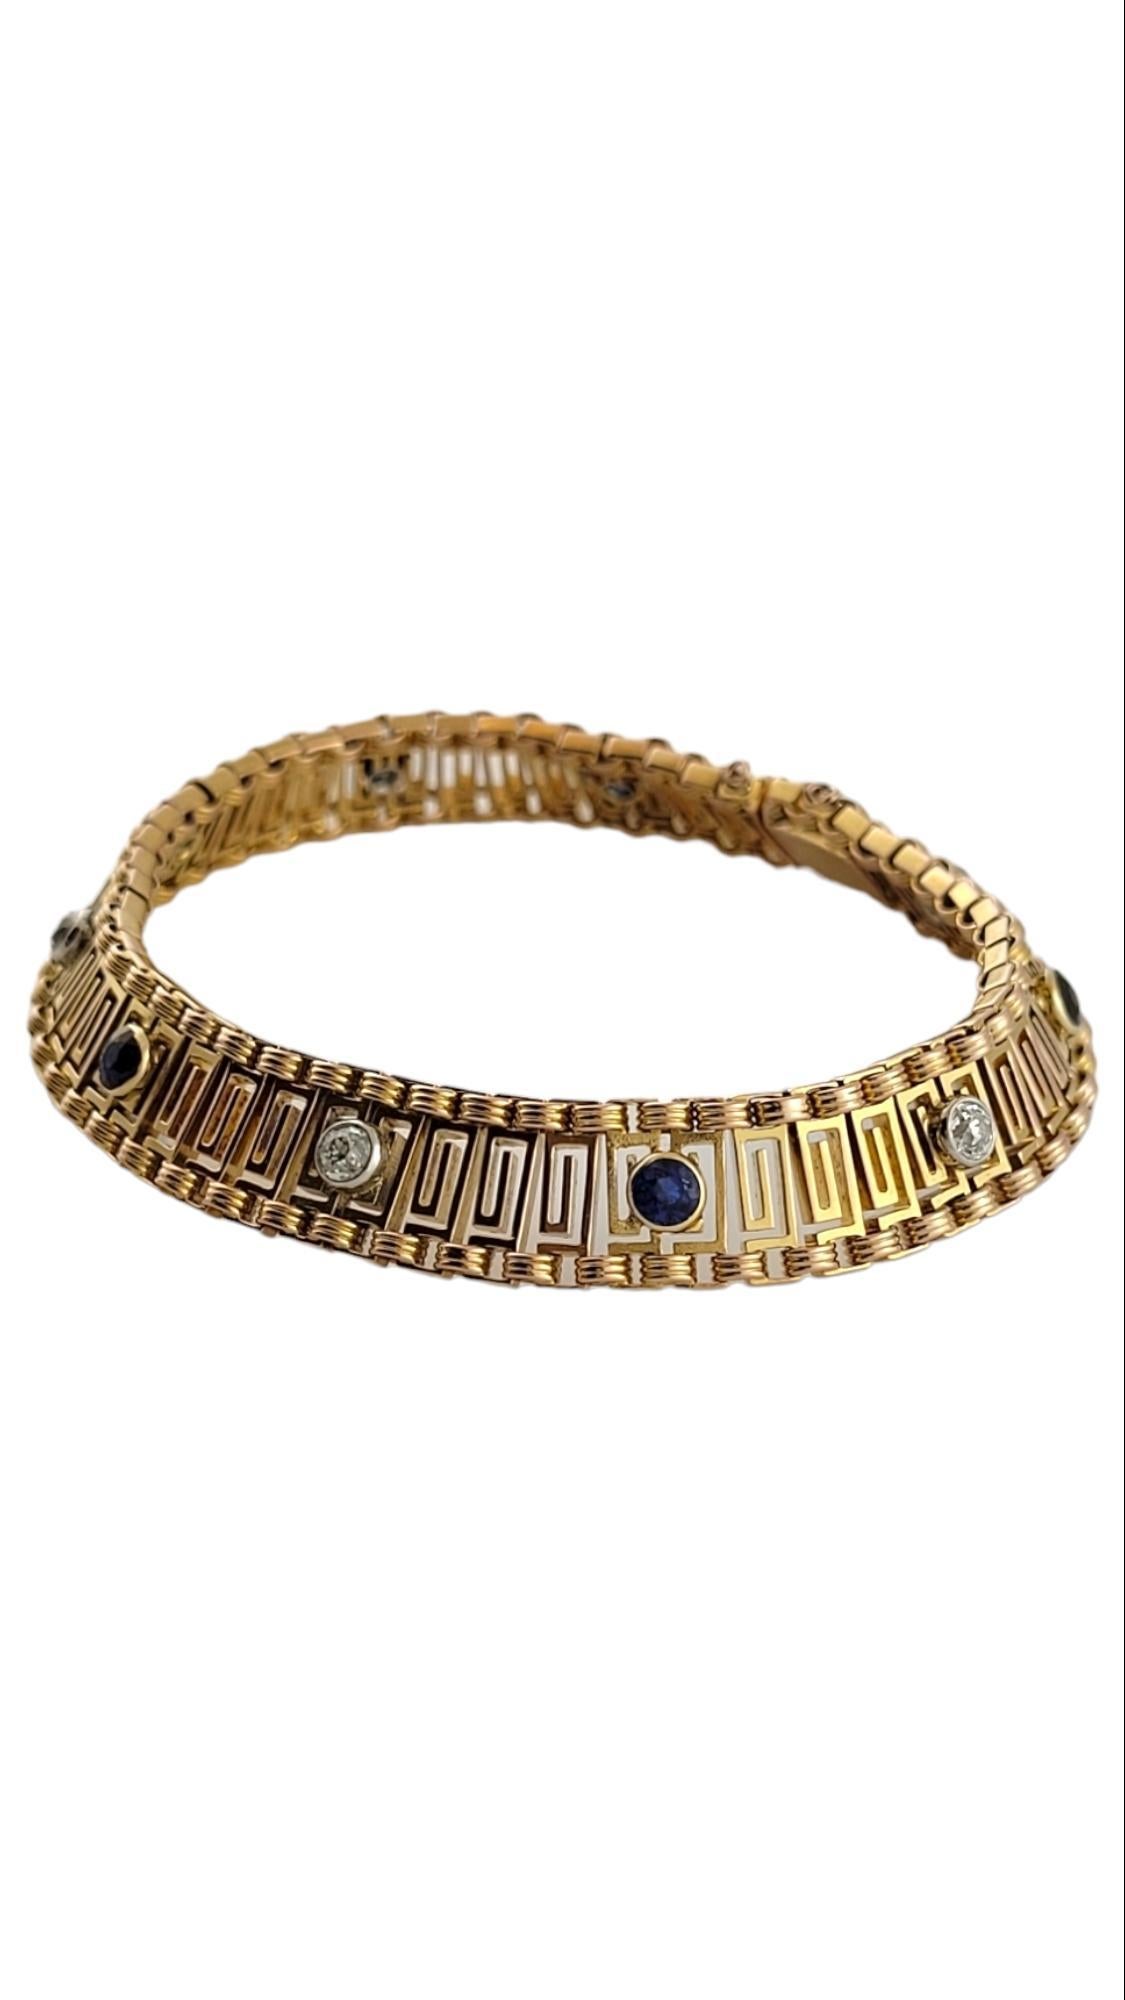  18K Yellow Gold Diamond Antique Bracelet

This gorgeous antique bracelet is beautifully crafted from 18K yellow gold with 5 sparkling old mine cut diamonds and 5 beautiful blue stones!

Approximate total diamond weight: .50 cts

Diamond color: